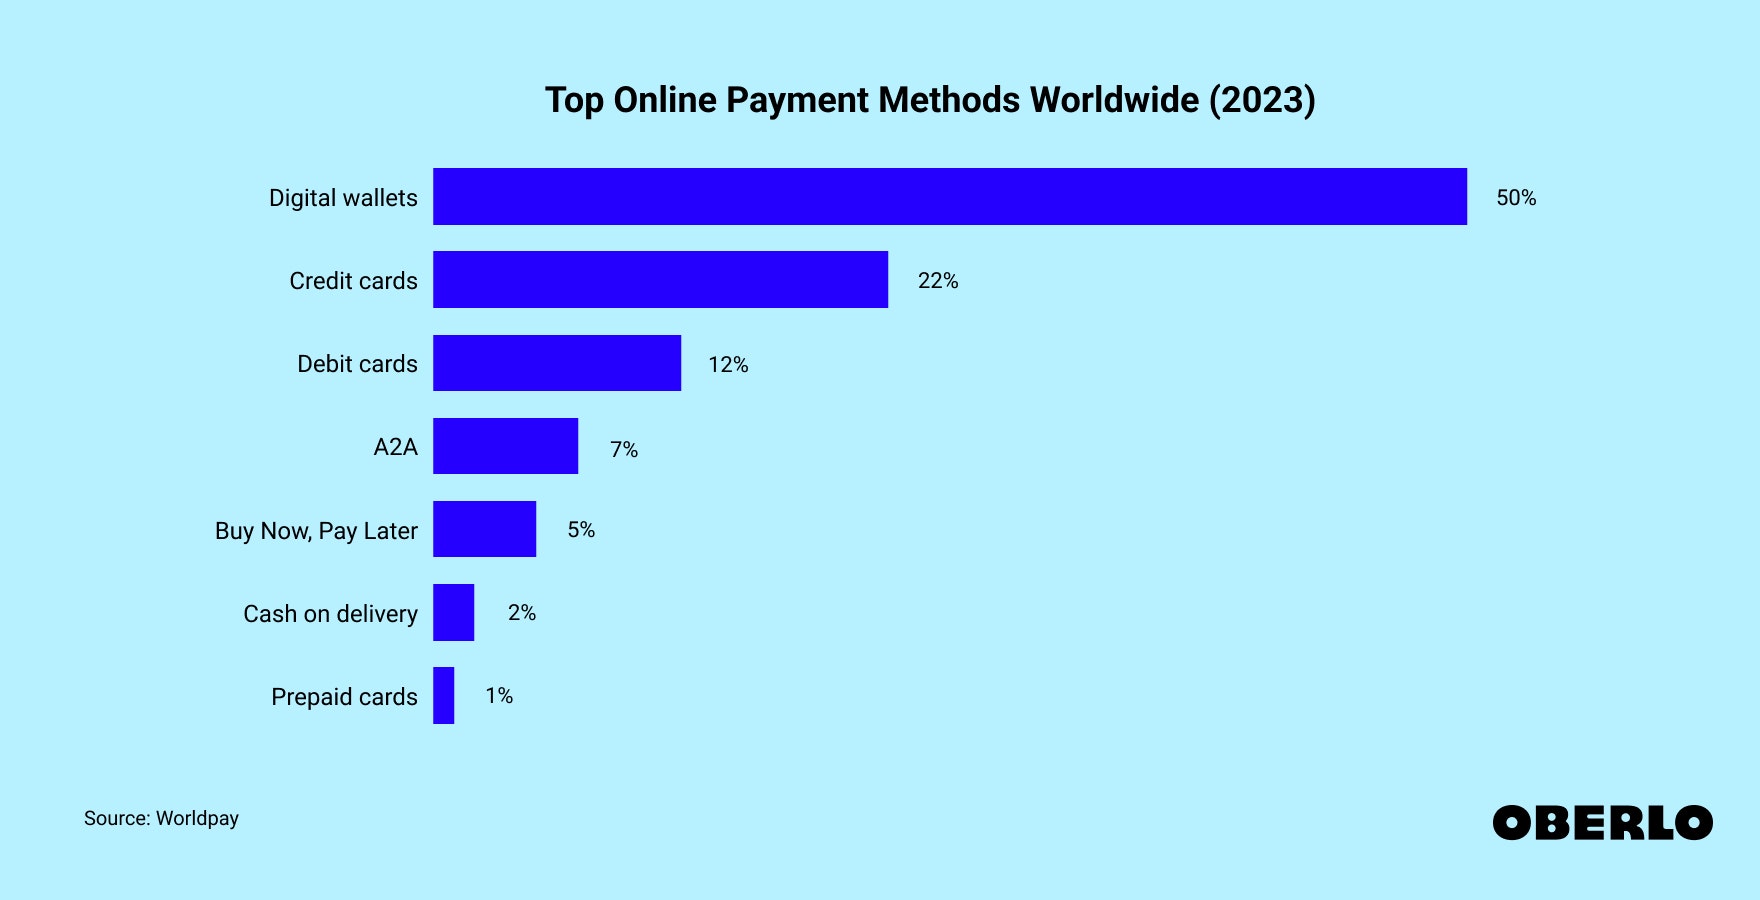 Chart showing the Top online payment methods worldwide